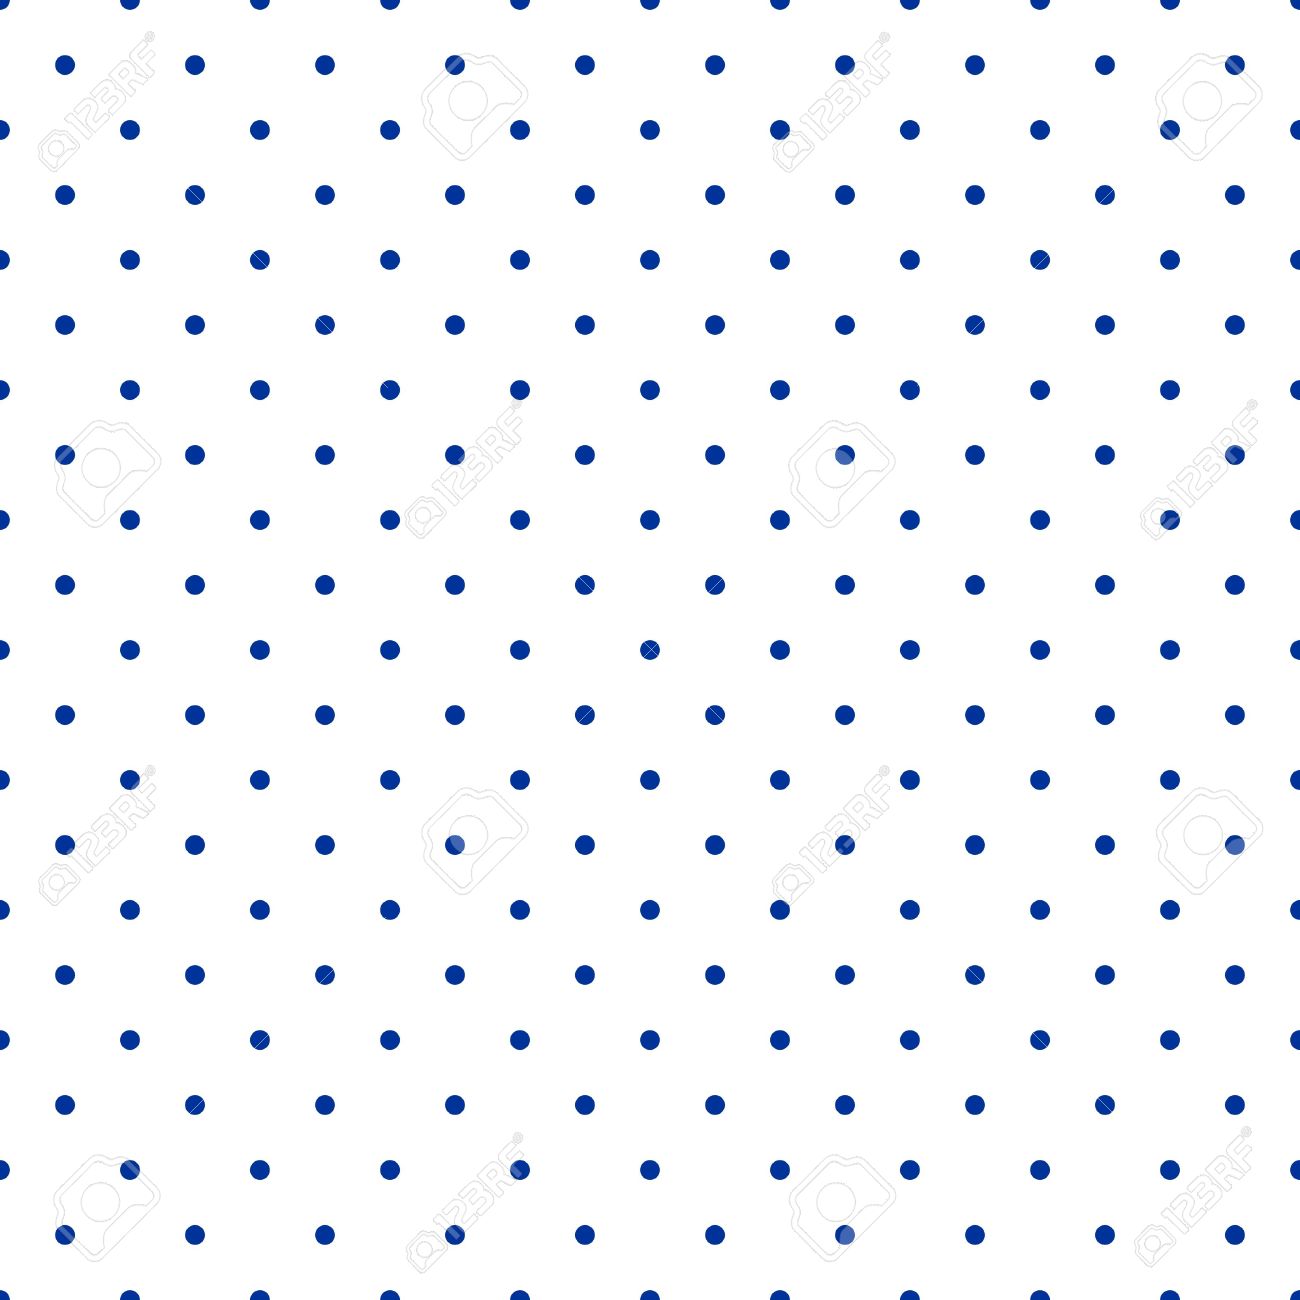 33482527-seamless-vector-pattern-with-small-tile-sailor-navy-blue-polka-dots-on-white-background.jpg